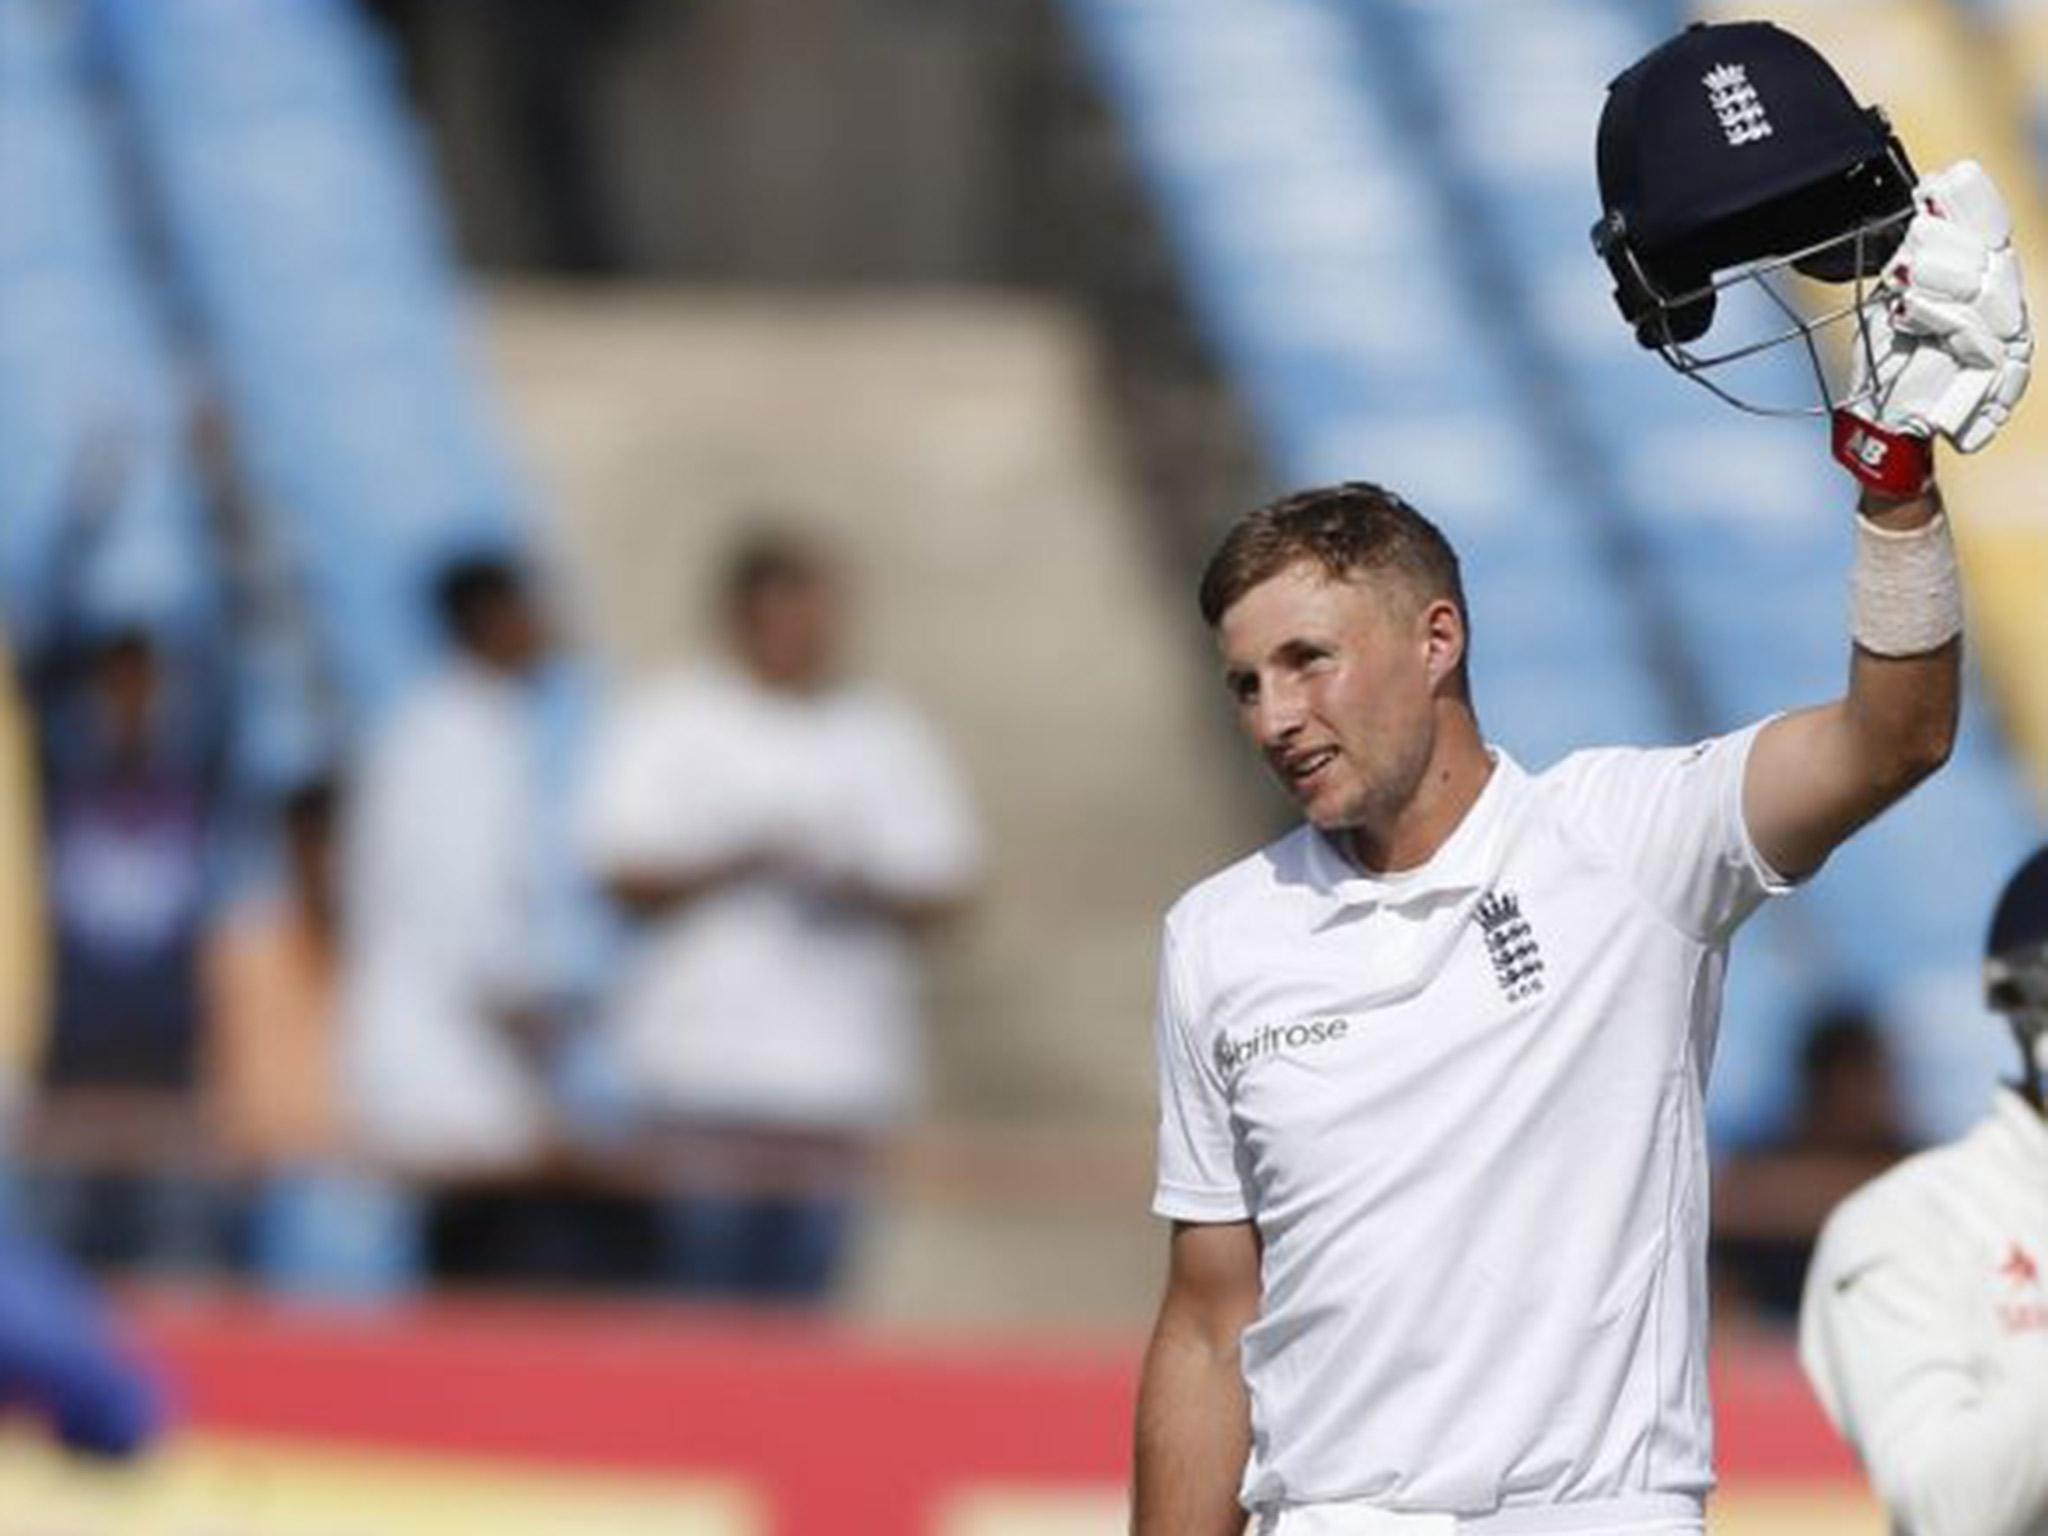 Joe Root was relieved to score his first century in Asia to put England in control in the first Test with India